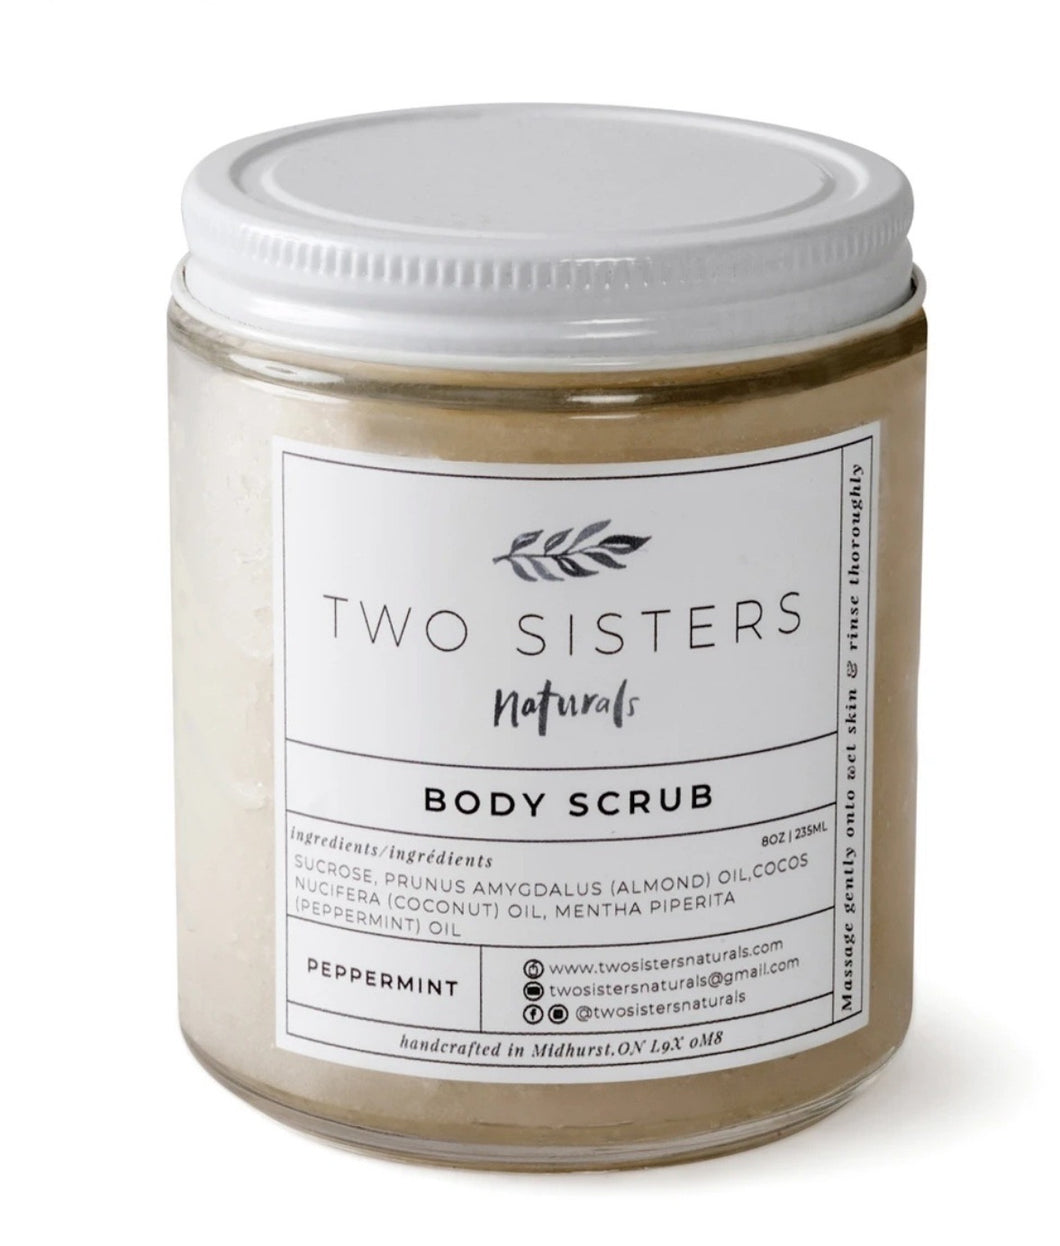 Two Sisters Naturals Body Scrub!  Peppermint!